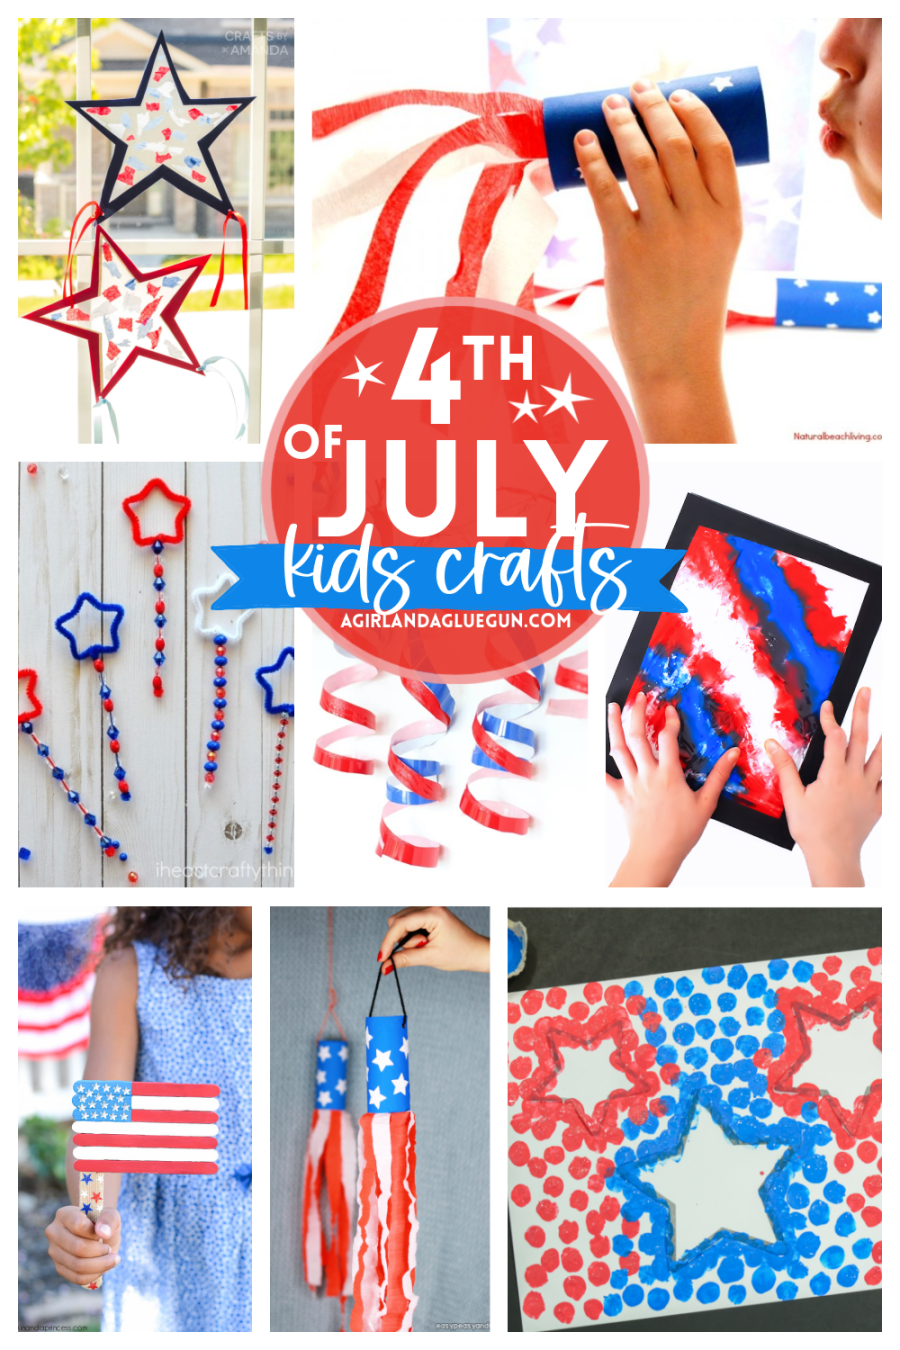 4th of july crafts for kids!